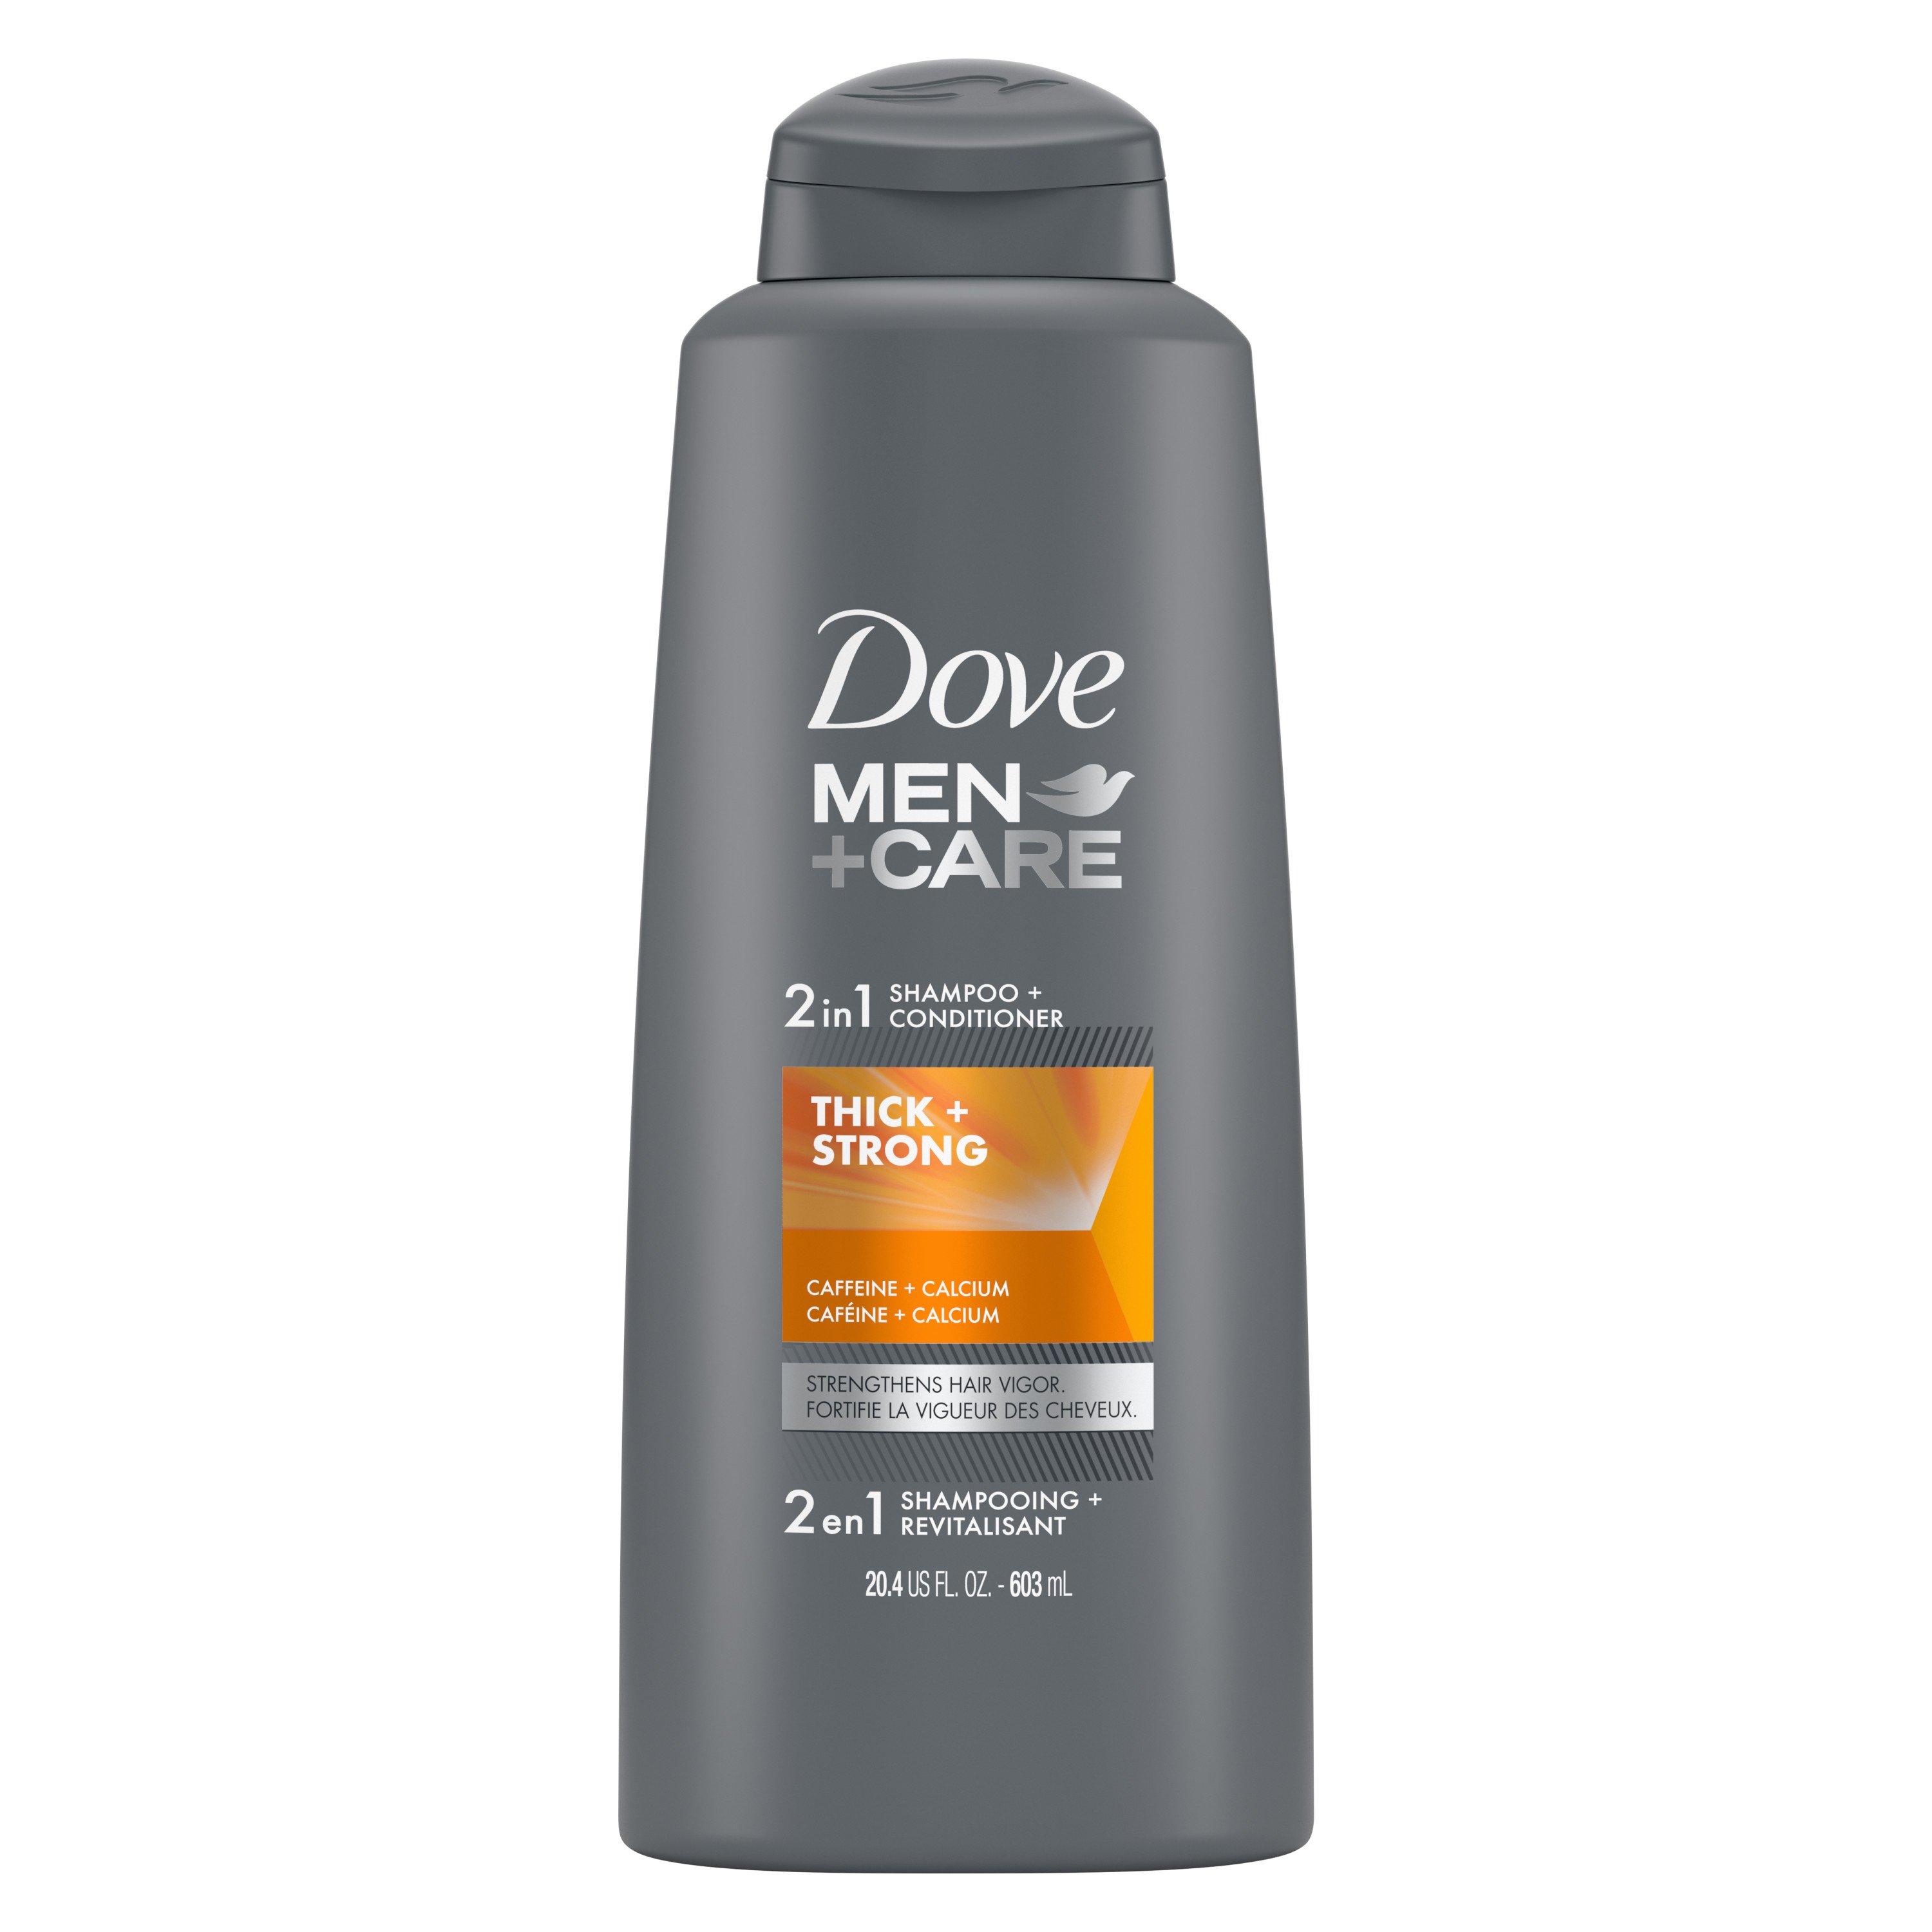 dove-men-care-thick-and-strong-2-in-1-shampoo-and-conditioner-shop